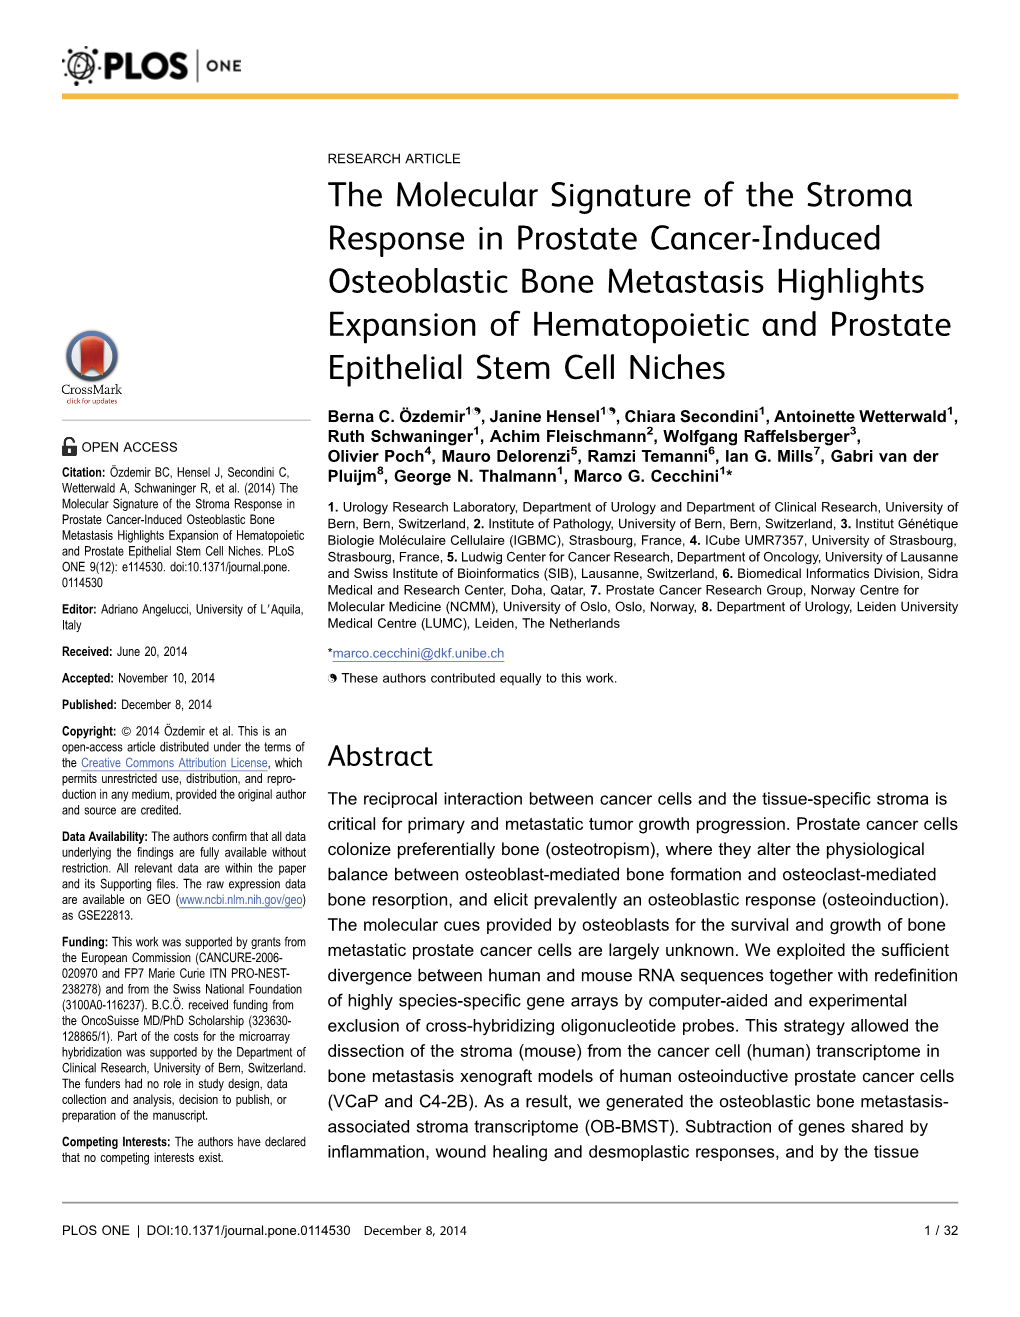 The Molecular Signature of the Stroma Response in Prostate